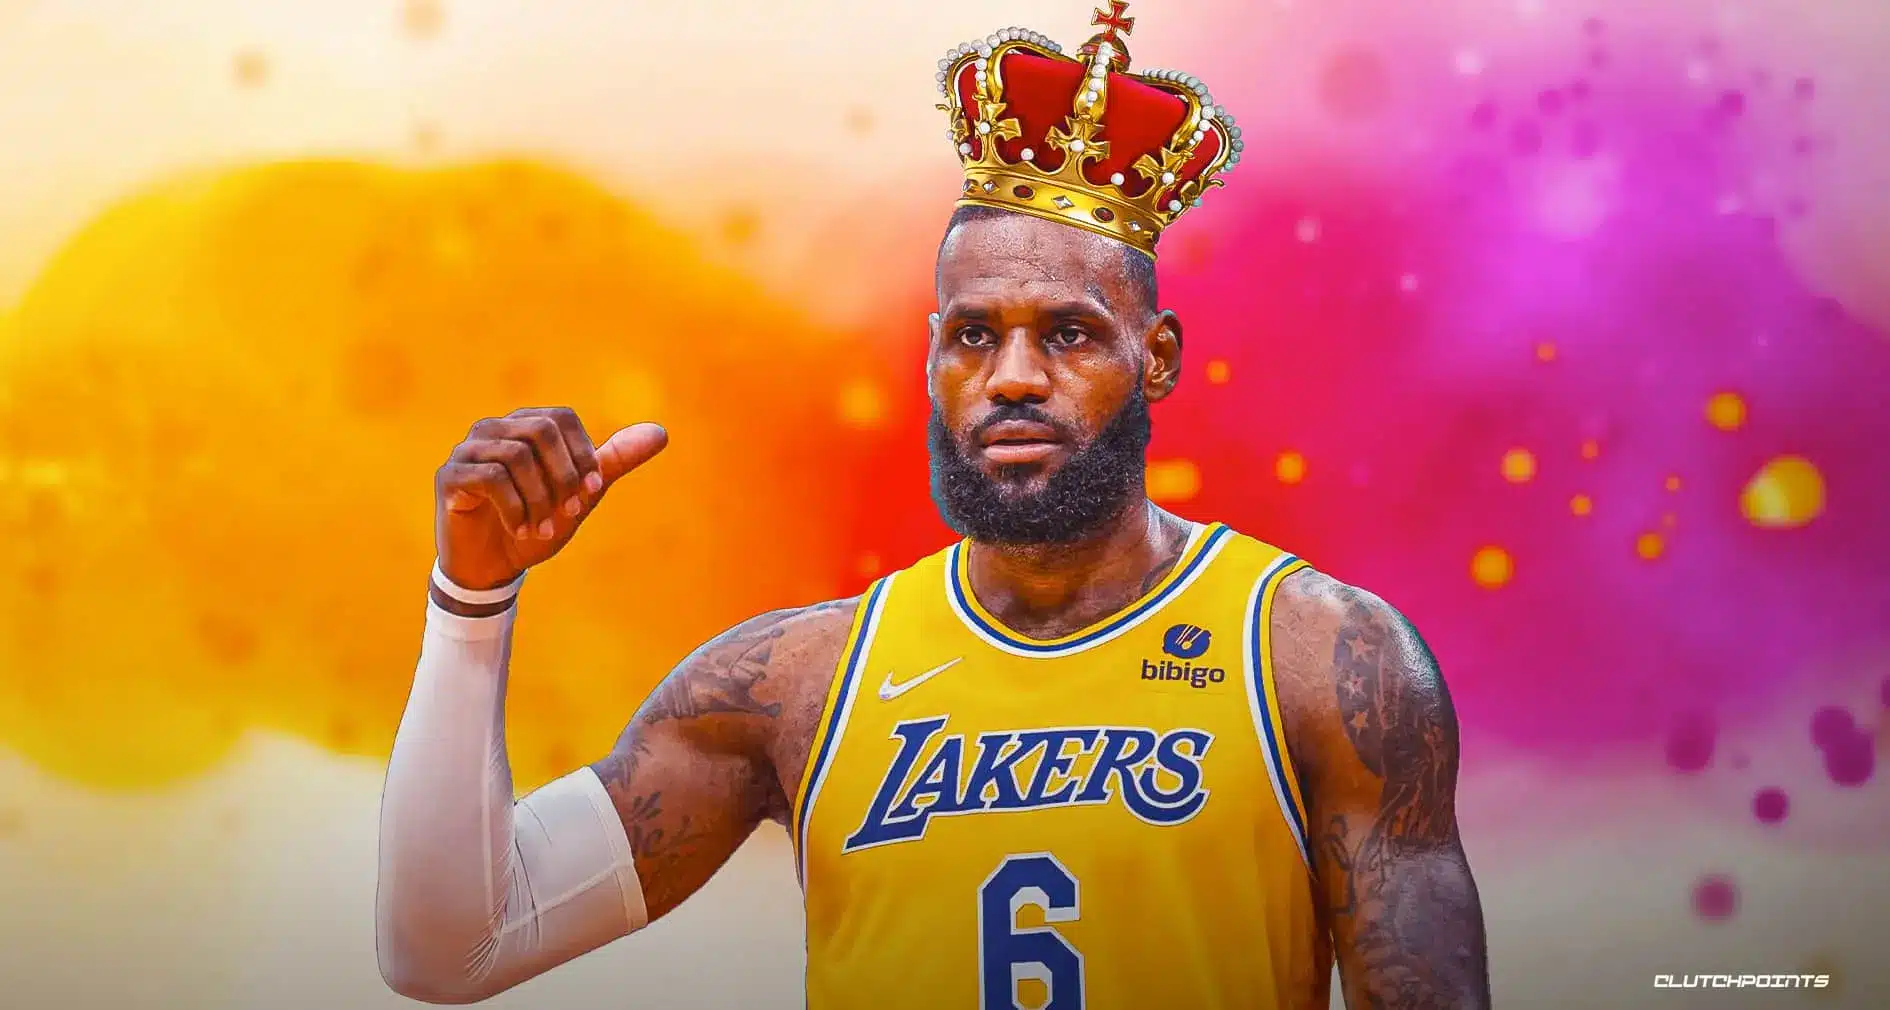 LeBron James has never been the highest paid player on his team